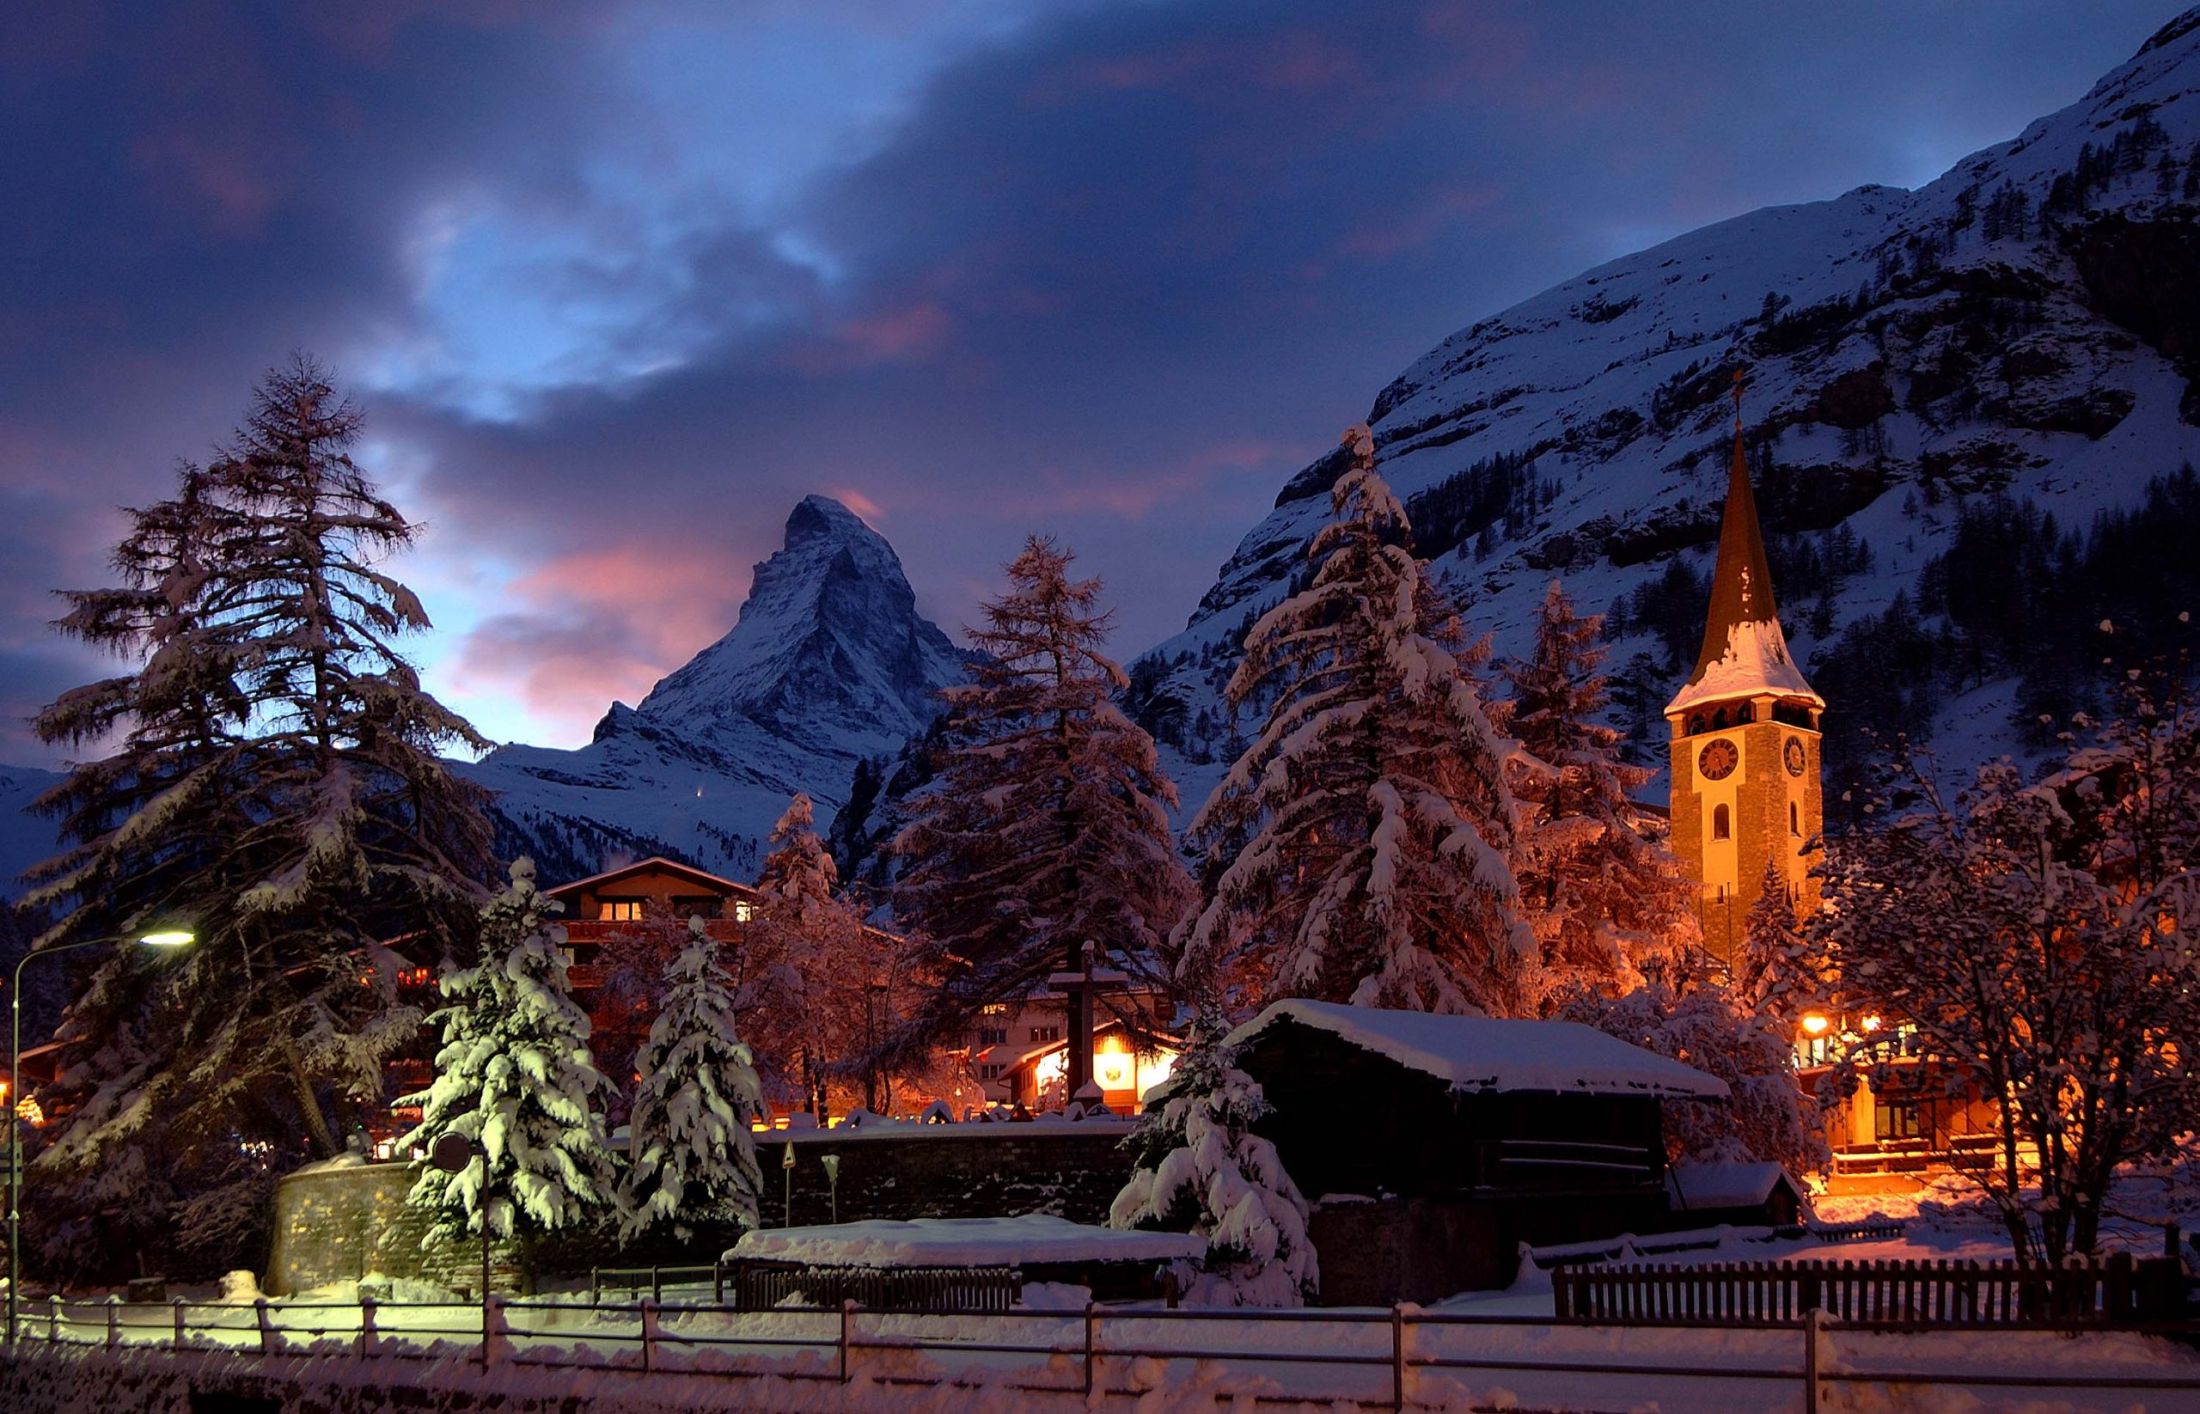 The centre of Zermatt displaying the iconic Matterhorn and church tower. A view desired by most luxury ski chalets in Zermatt.